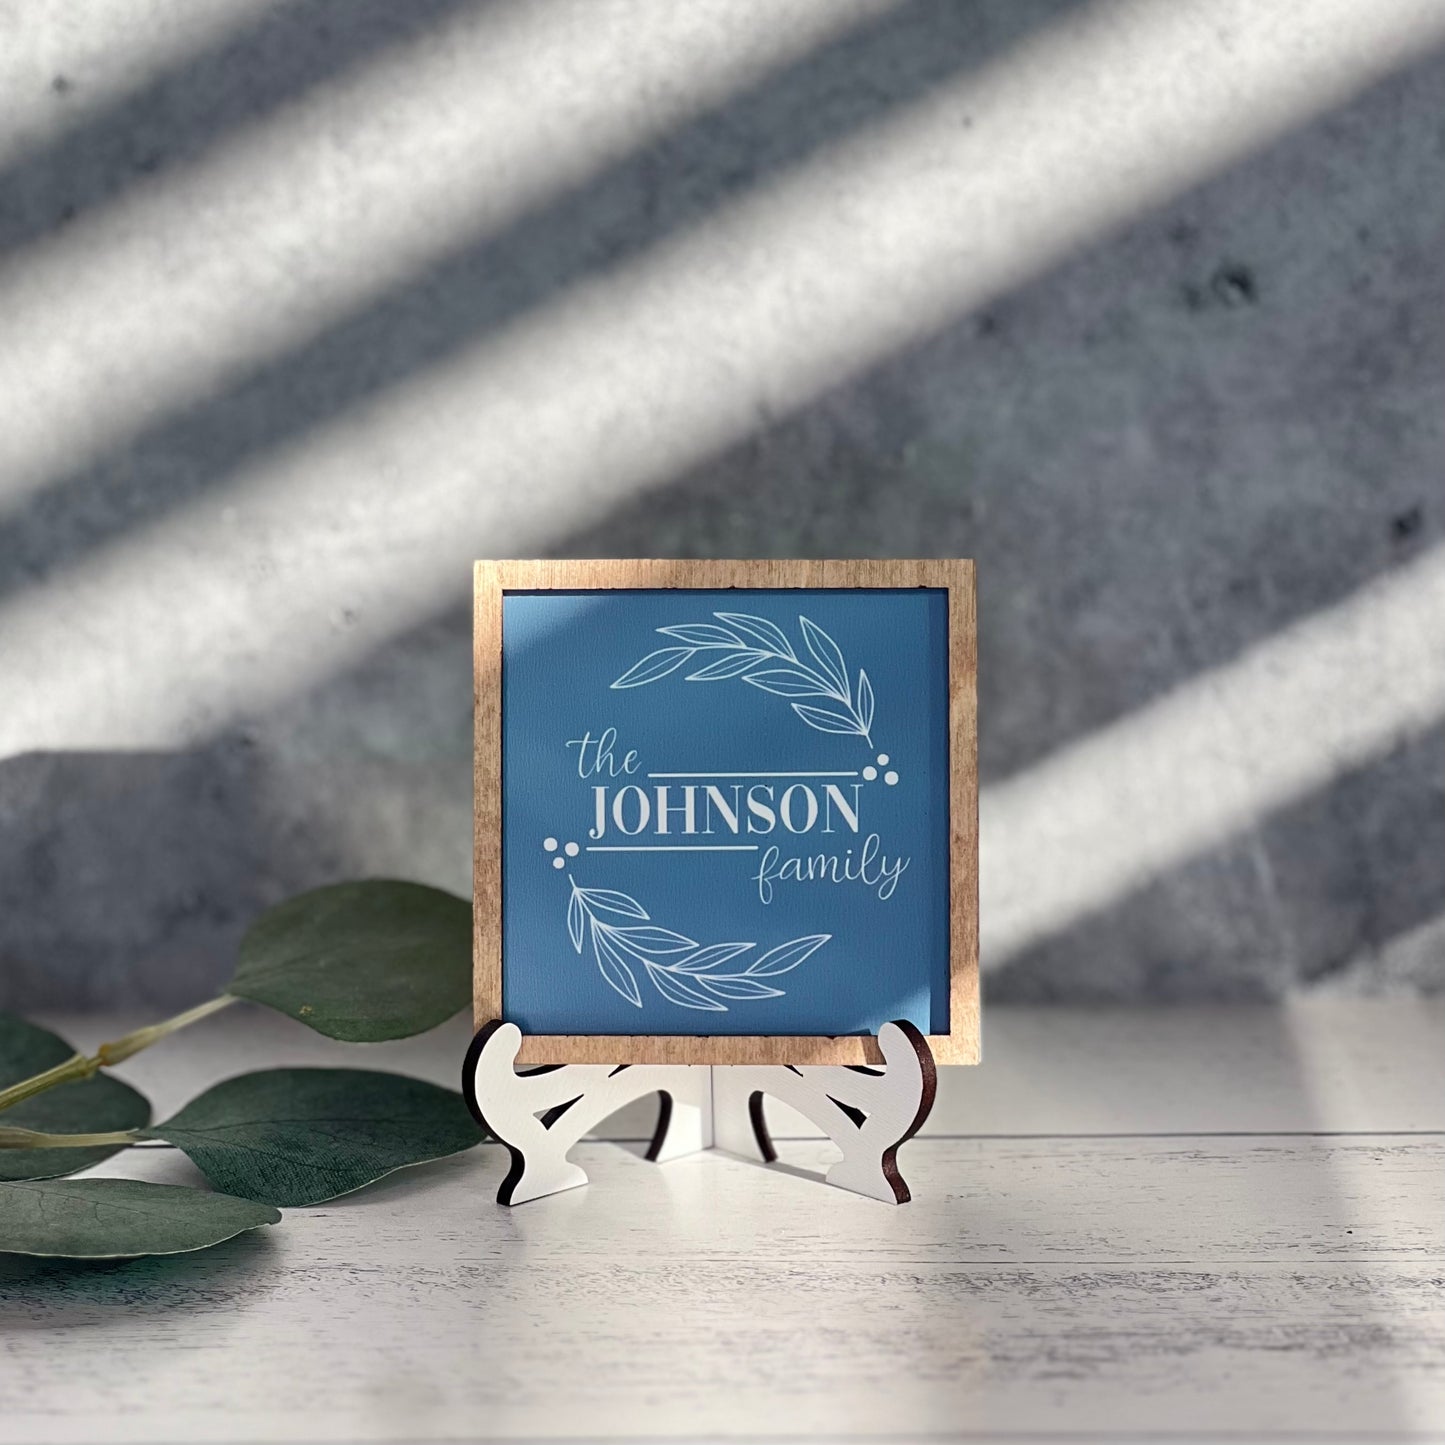 Mini Framed Nautical Themed Sign | Welcome To Our Home